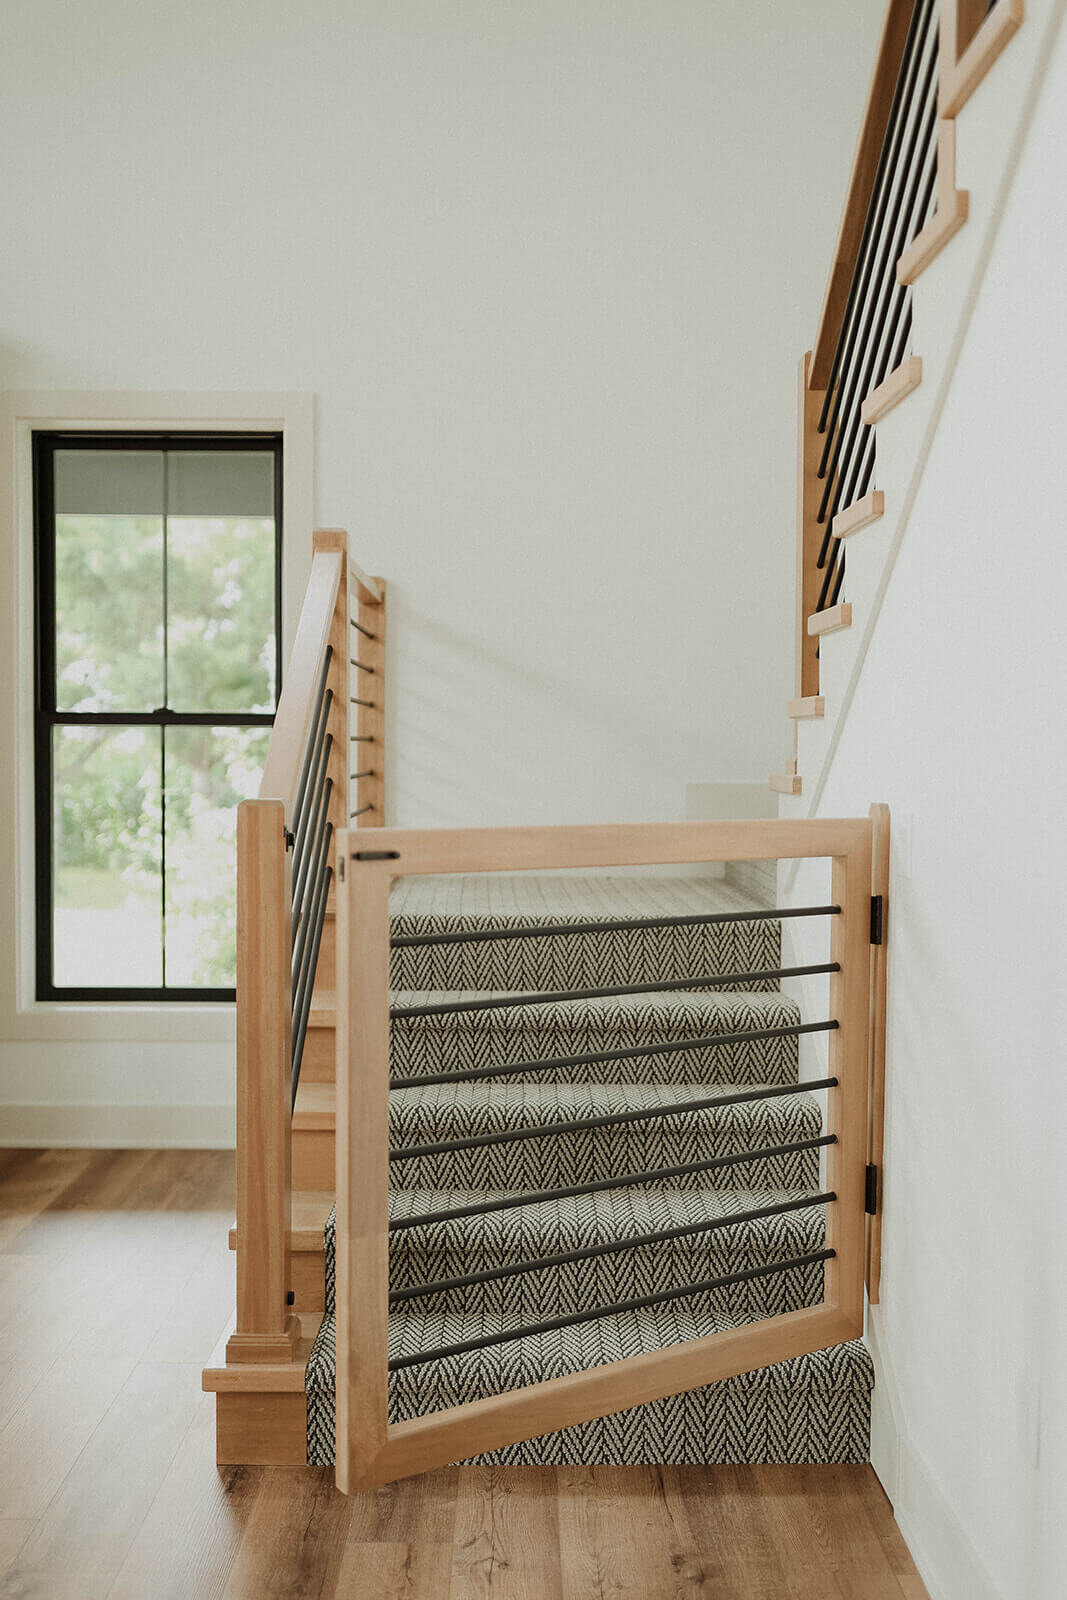 L-Ave-Stairs-Interior-Design-Grimes-Des-Moines-Waukee-West-Des-Moines-Ankeny-Lake-Panorama-Central-Iowa-3F1A2845(1)